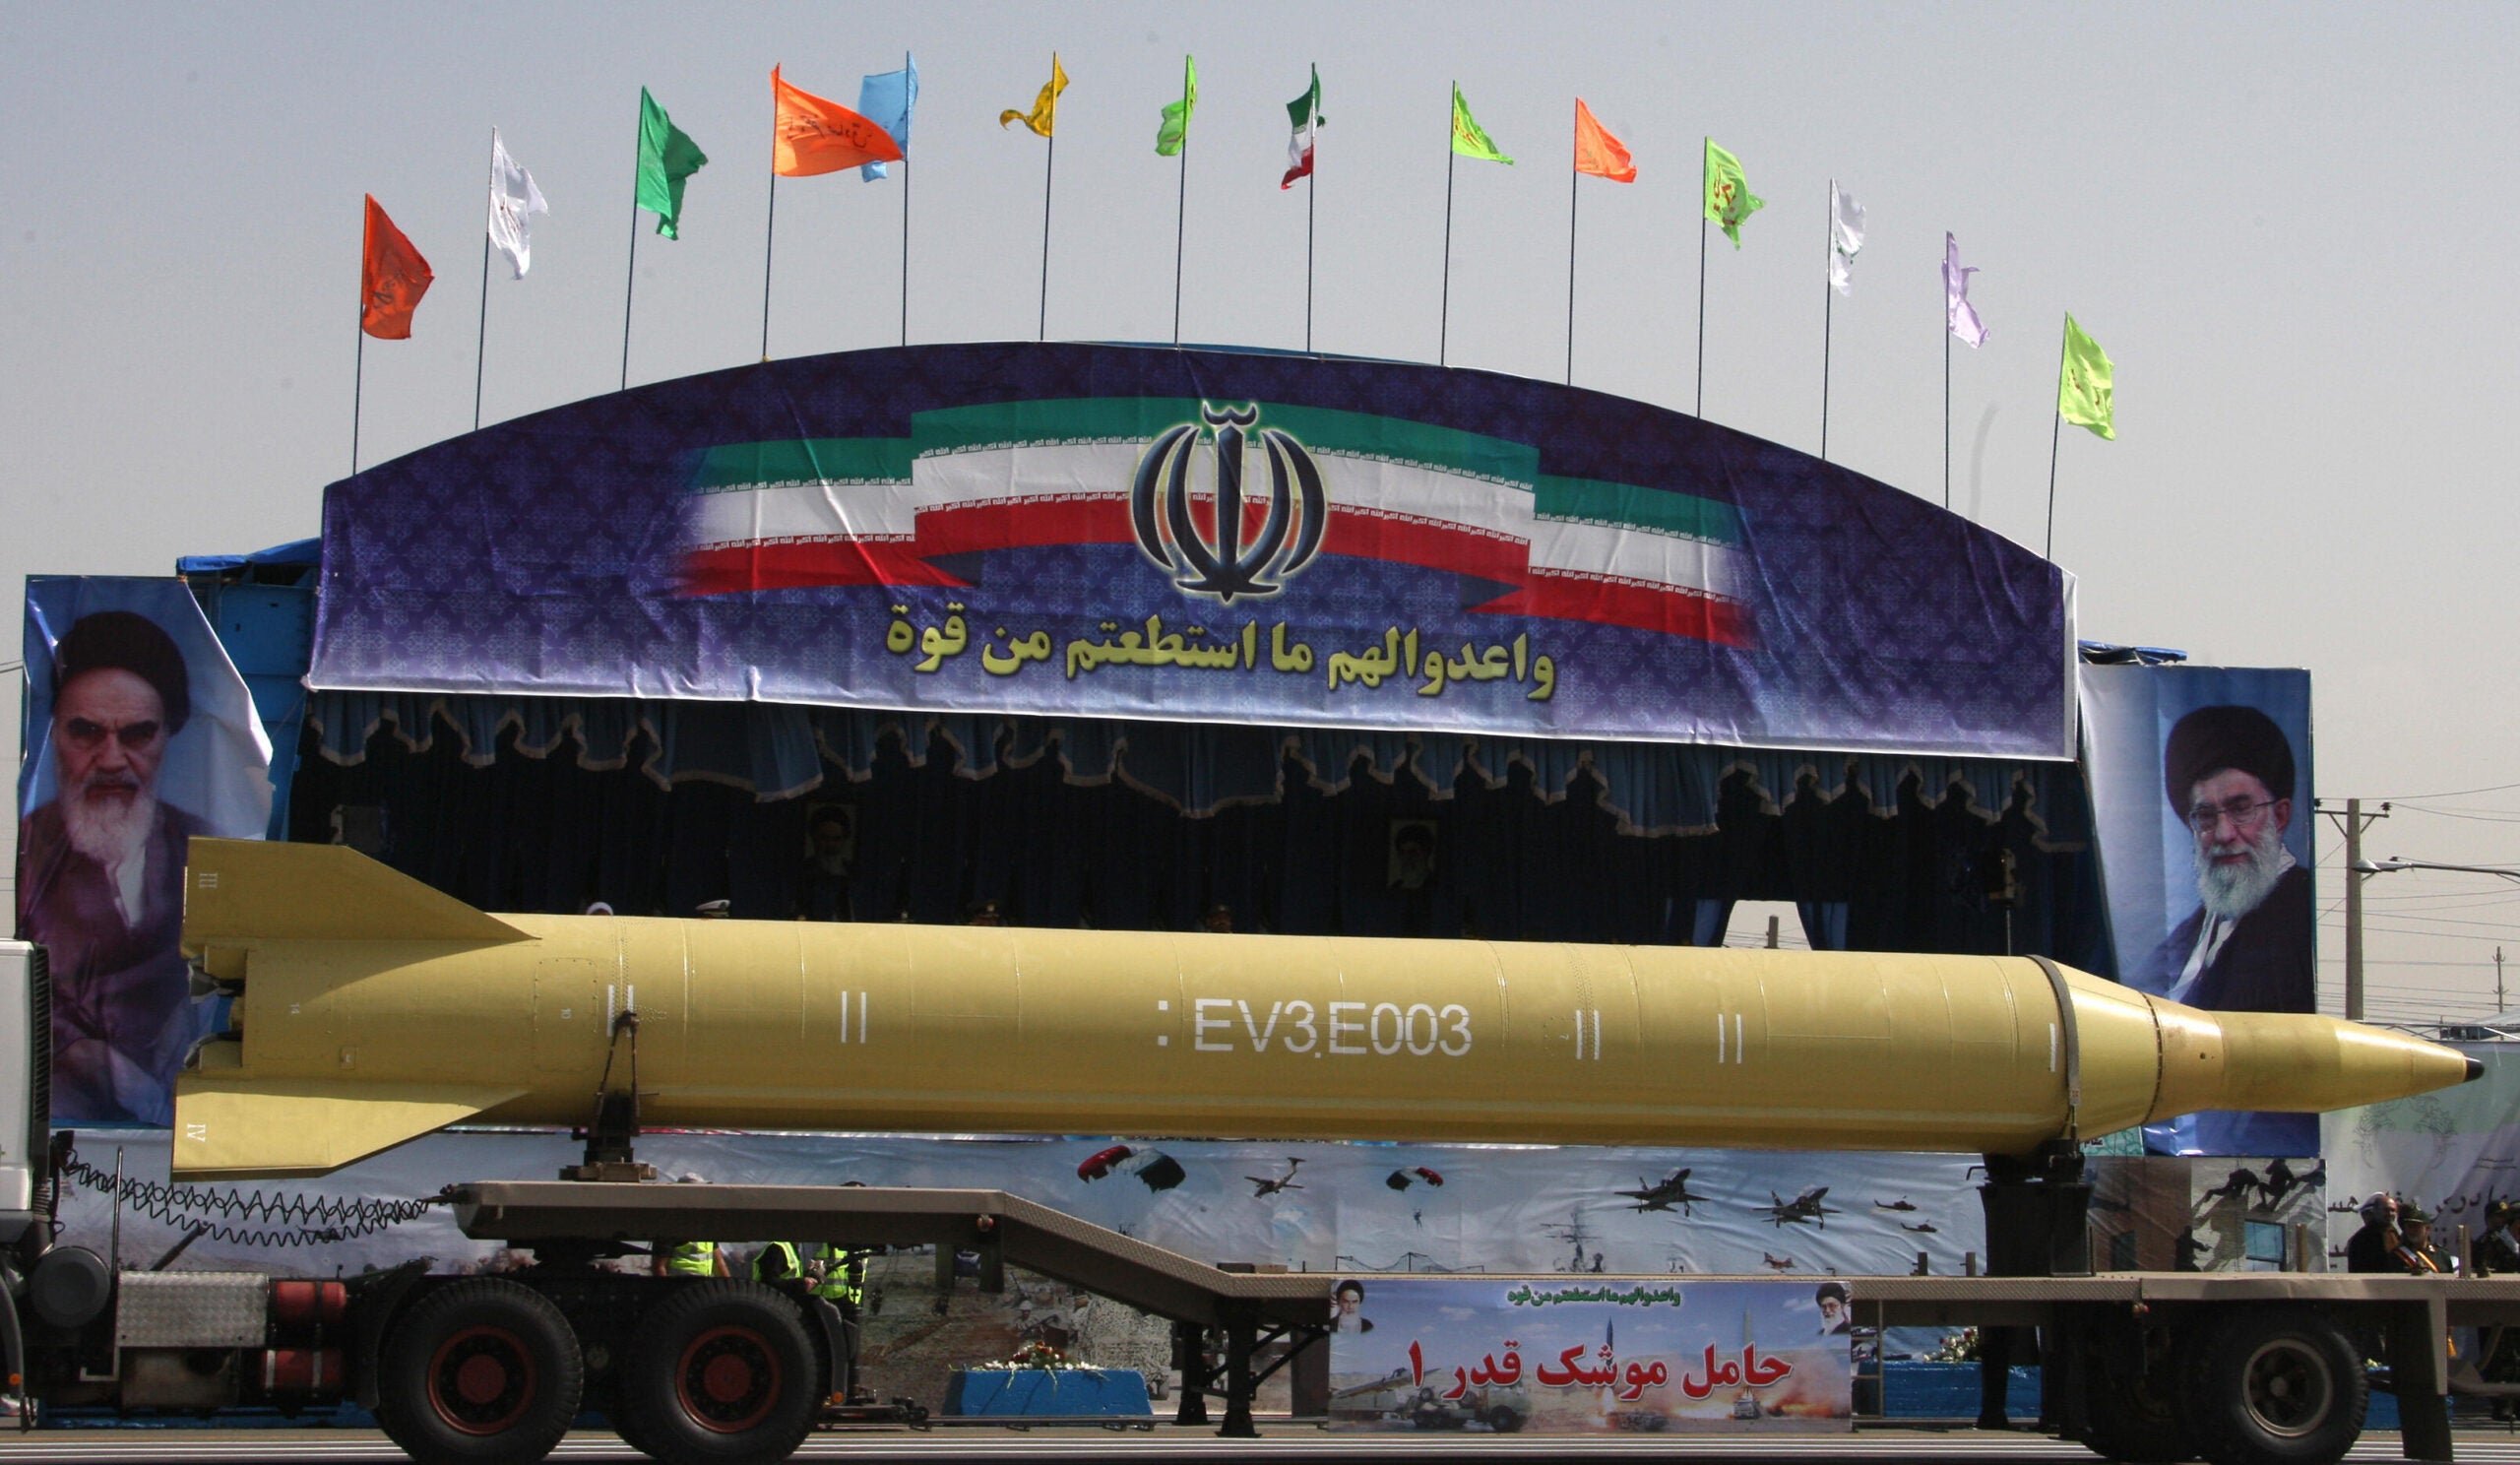 A military truck carries a long-range Ghadr-1 missile during an annual military parade which marks Iran's eight-year war with Iraq, in the capital Tehran on September 22, 2009. Iranian President Mahmud Ahmadinejad warned that Iran would confront any attack on the Islamic republic, addressing an army parade which was marred by the reported crash of a military plane. AFP PHOTO/ATTA KENARE (Photo credit should read ATTA KENARE/AFP via Getty Images)